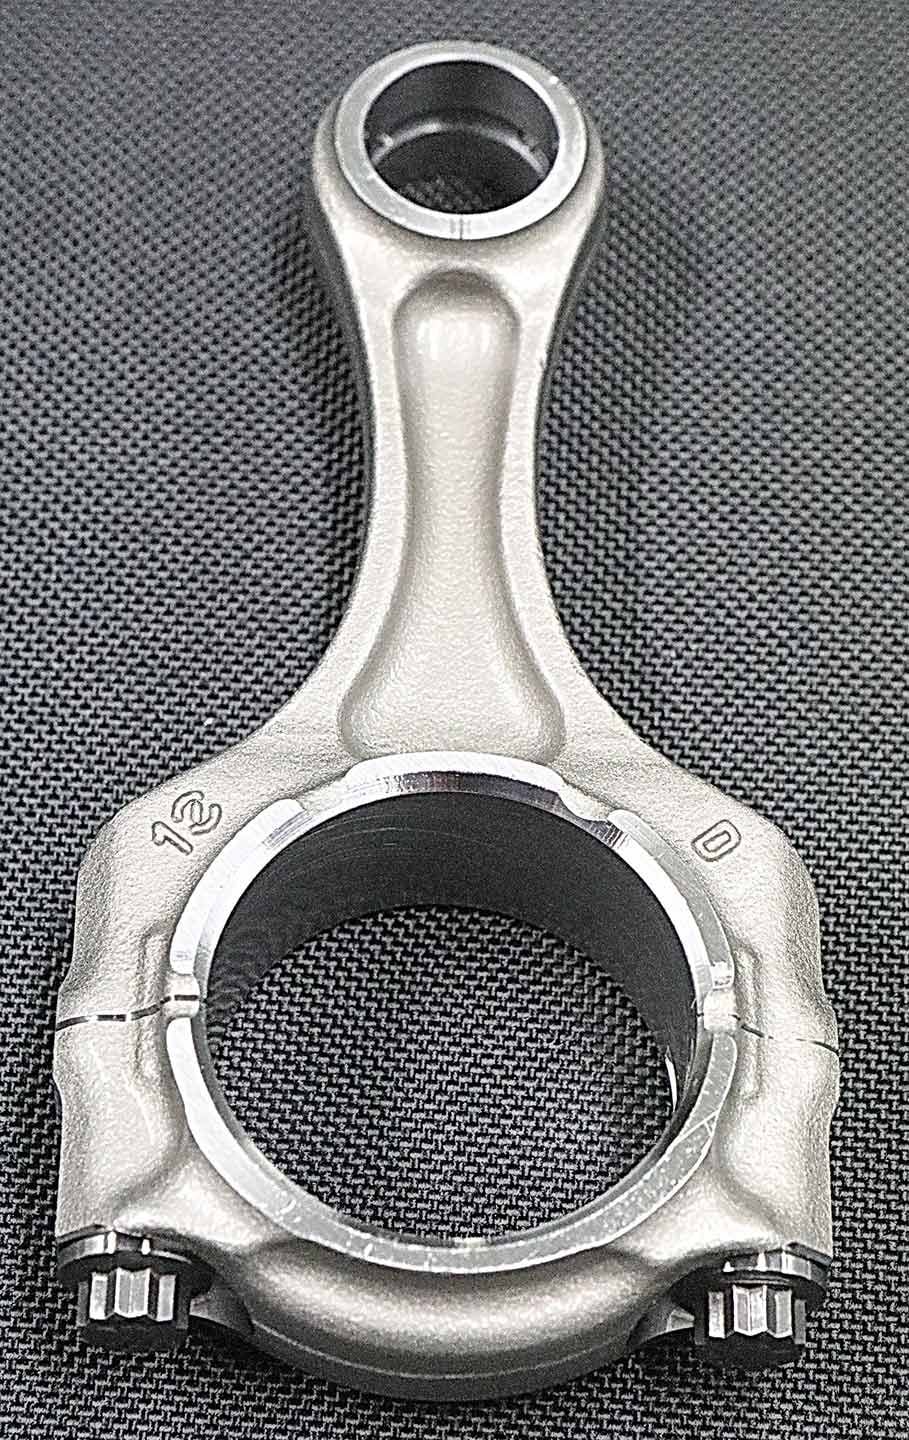 The Superquadro uses a forged connecting rod.